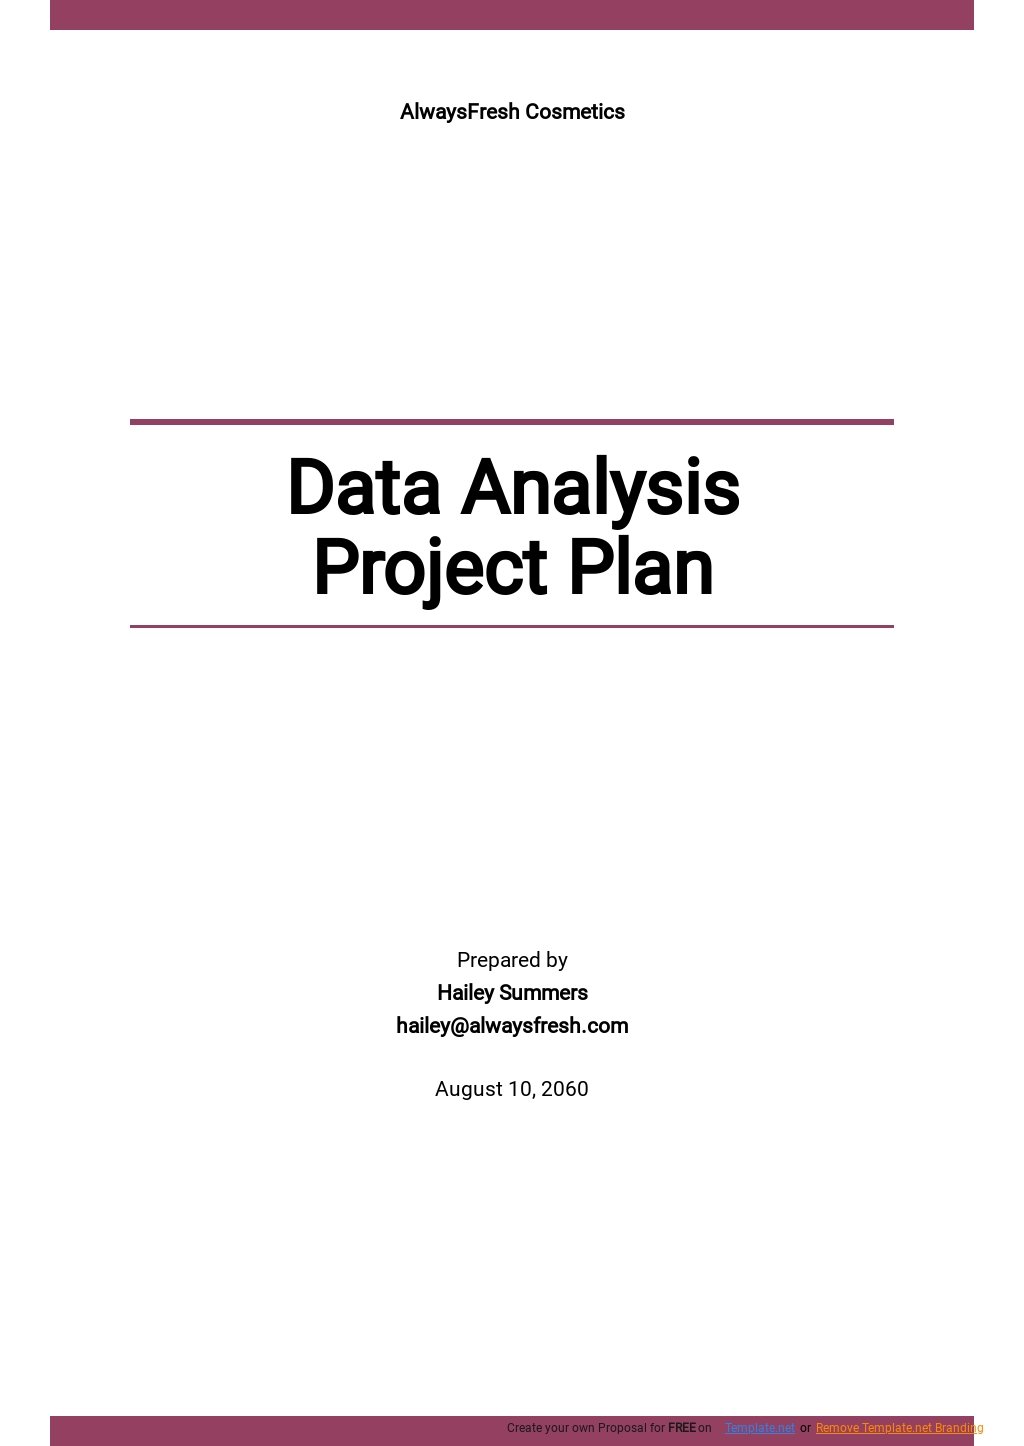 Data Analysis Project Plan Template 